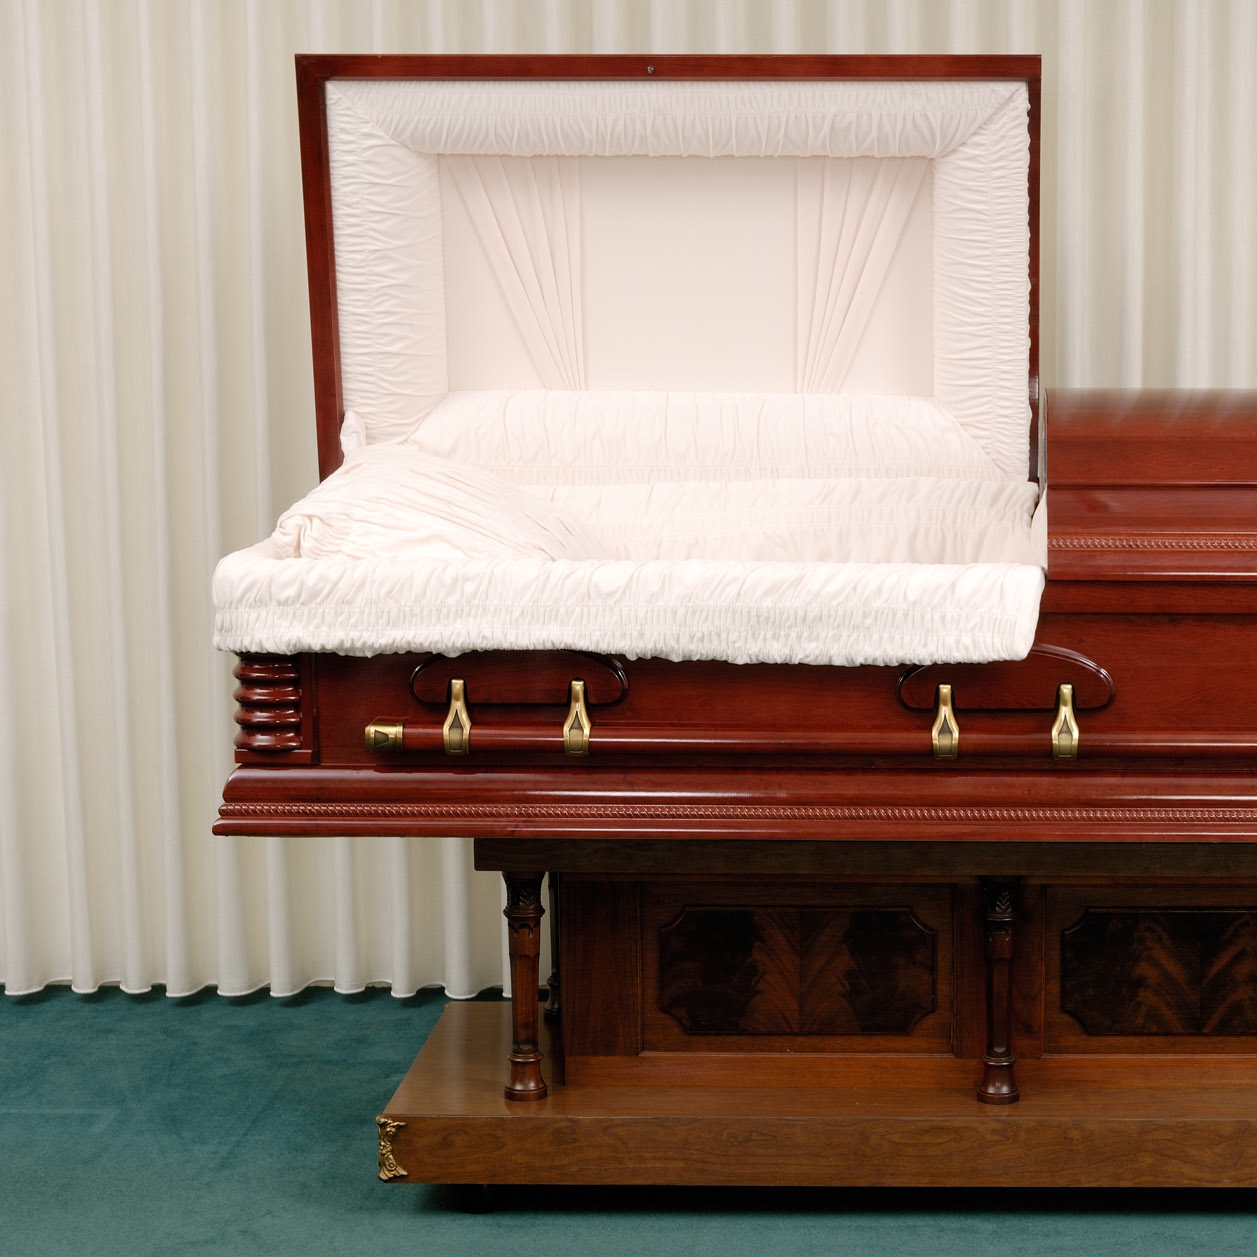 Funeral Parlor.